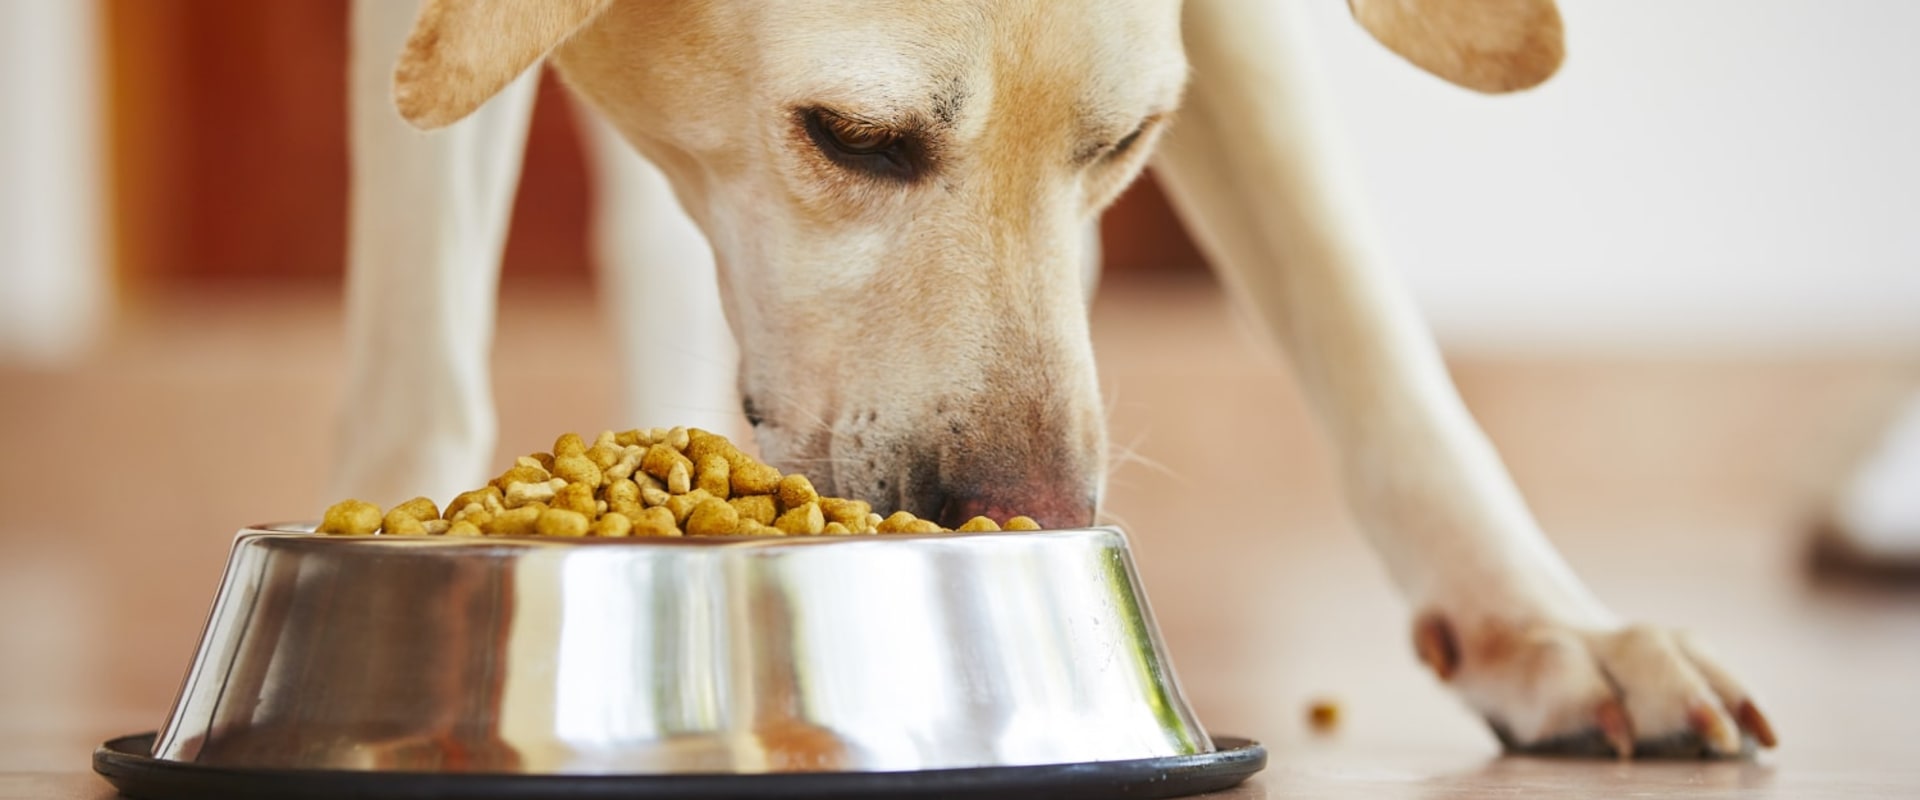 What Dog Food is Not Recommended by Vets?